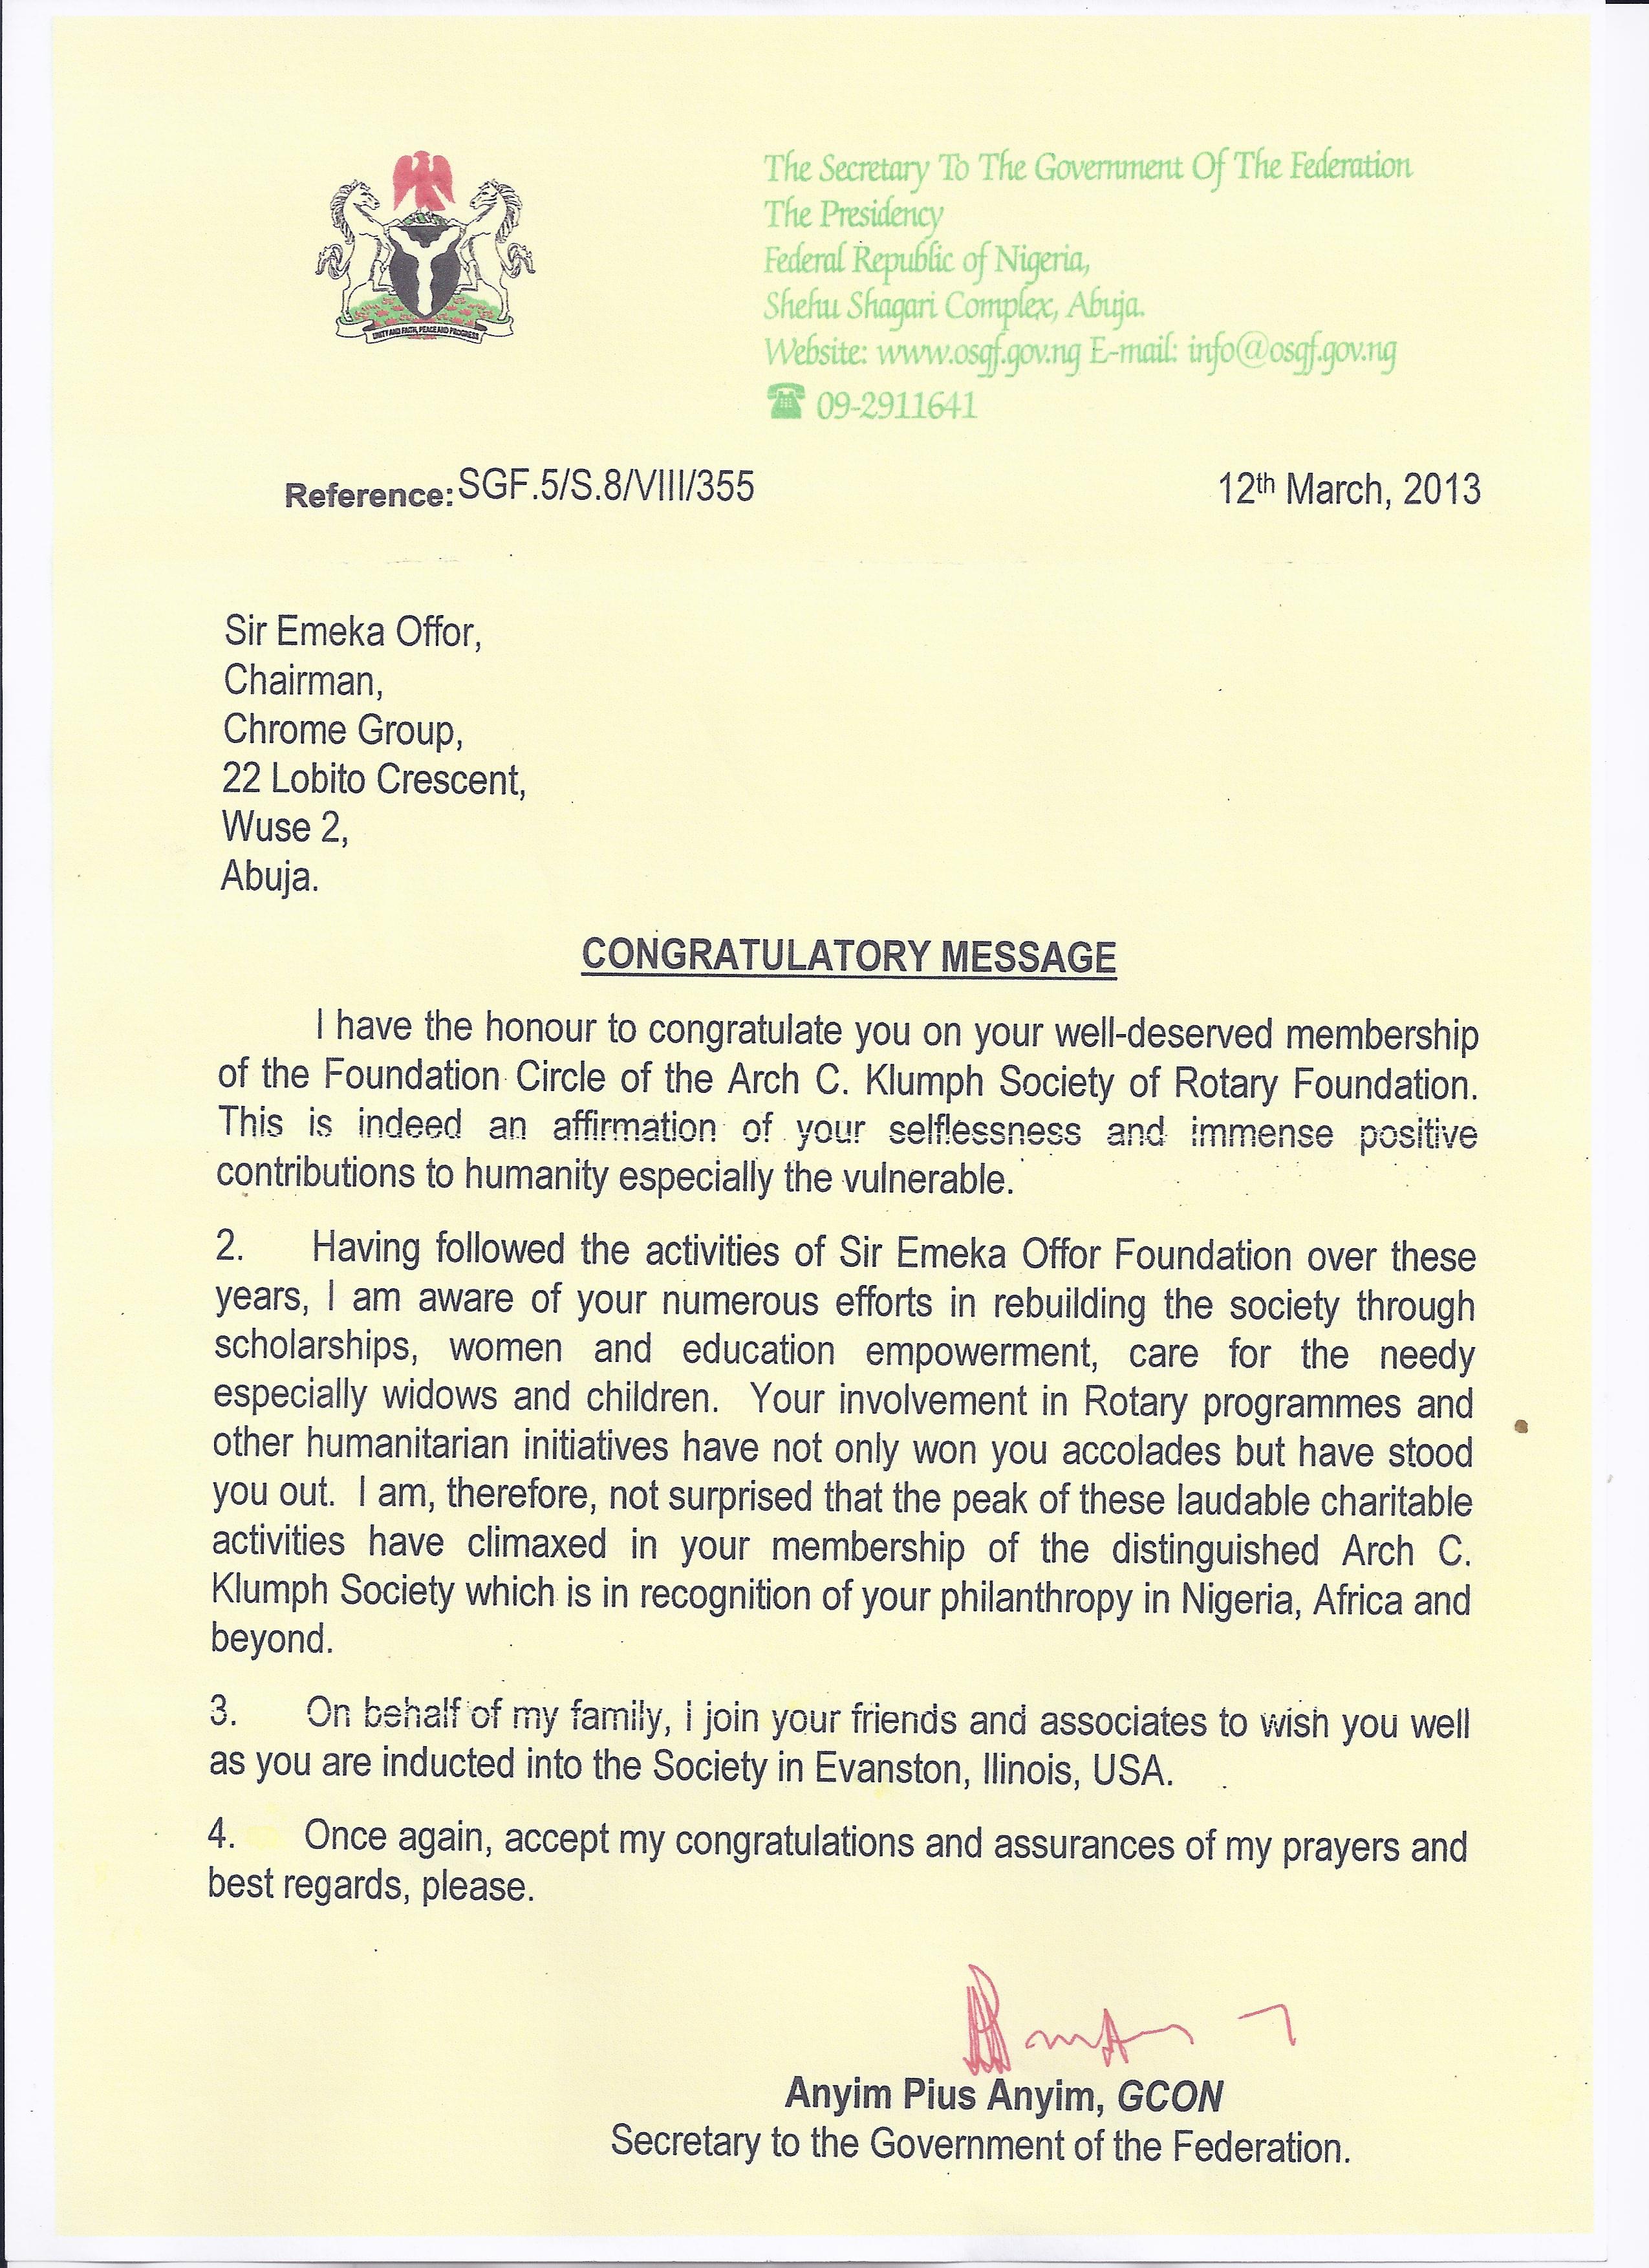 Letter of Congratulations from the Secretary to the Government of the Federation